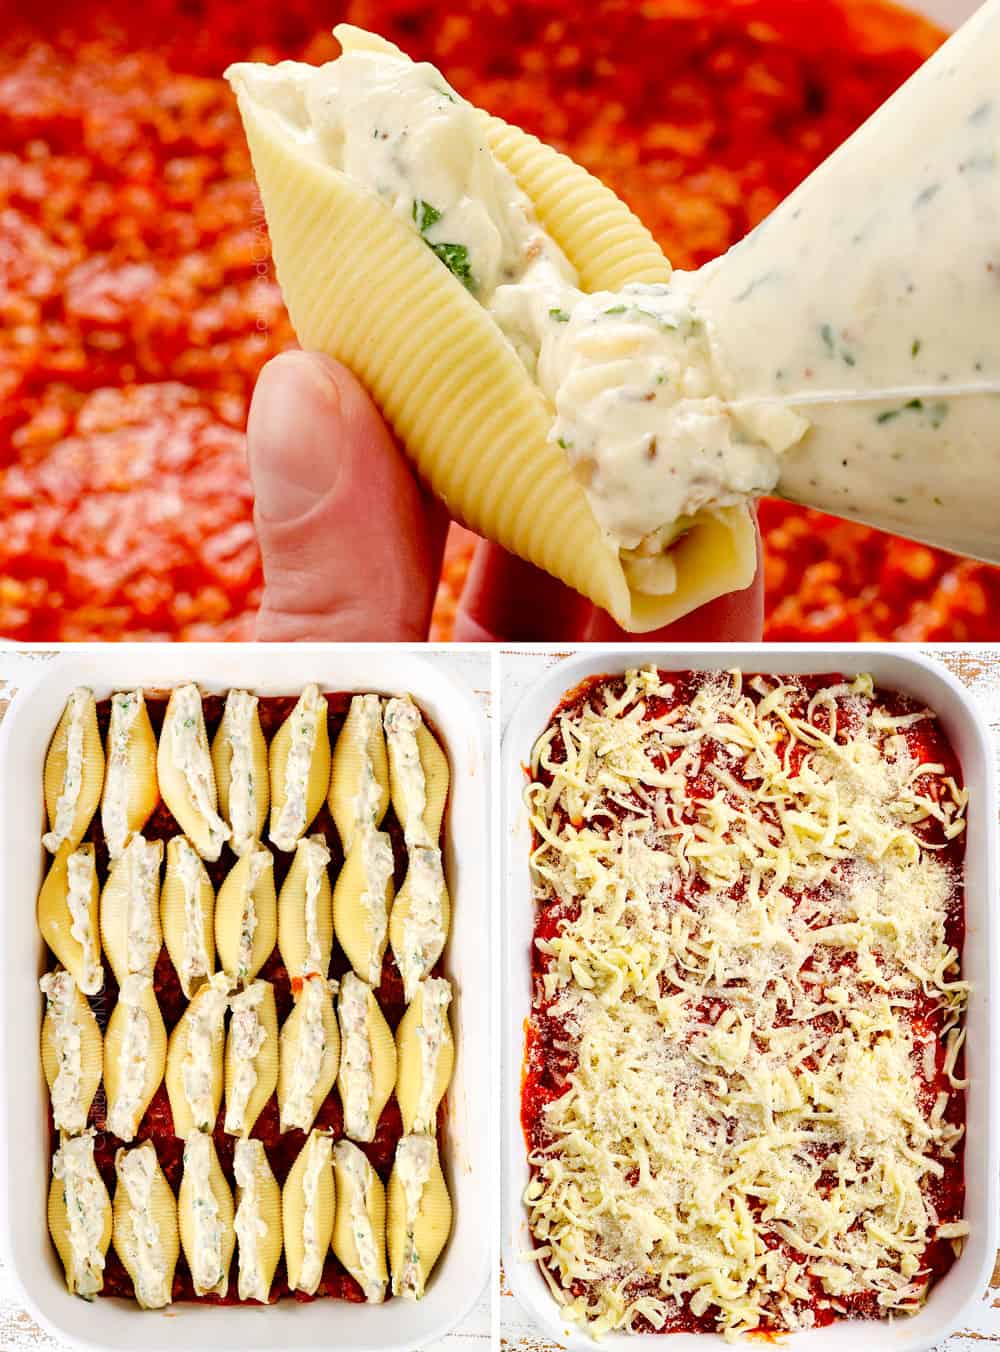 a collage showing how to make stuffed shells recipe by 1) iping ricotta, meat filling into the jumbo pasta shell, 2) line meat stuffed shells in a baking dish, 3) cover the stuffed shells with marinara and mozzarella cheese